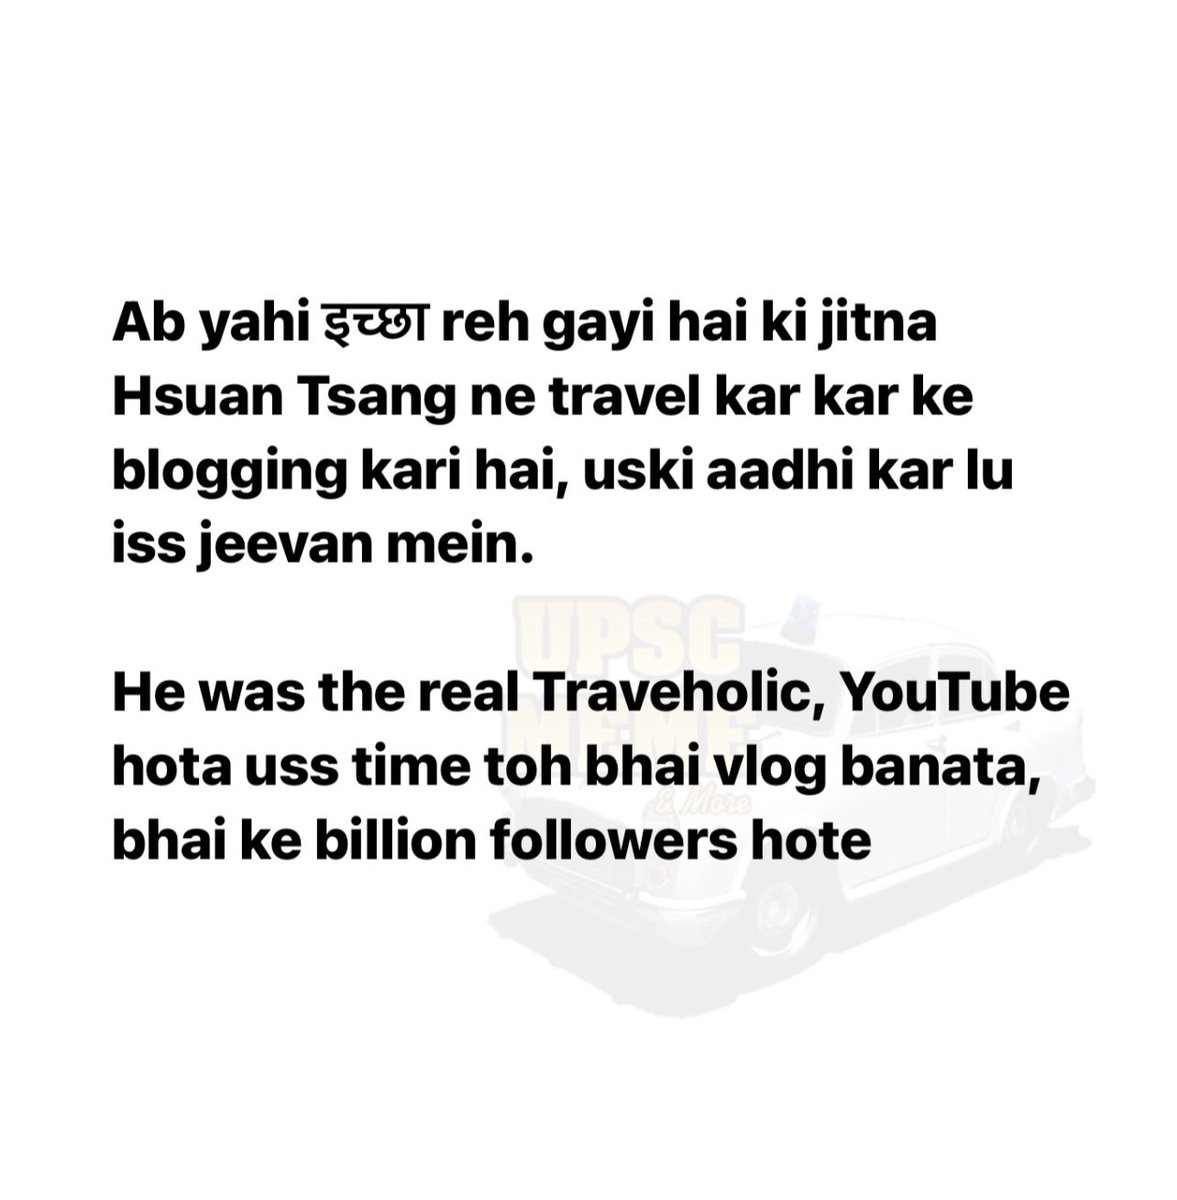 New age travel vloggers got nothing on him!
#बकैतीonly #upsc #upscprelims2024 #upscaleias #lbsnaa #civilservices #civilservicesexamination #upsc #ips #ias #upscale #ipsofficer #ipsmotivational #ips_officers #upscmotivation #upscprelims #upscaspirants # #iasmotivation #upsc